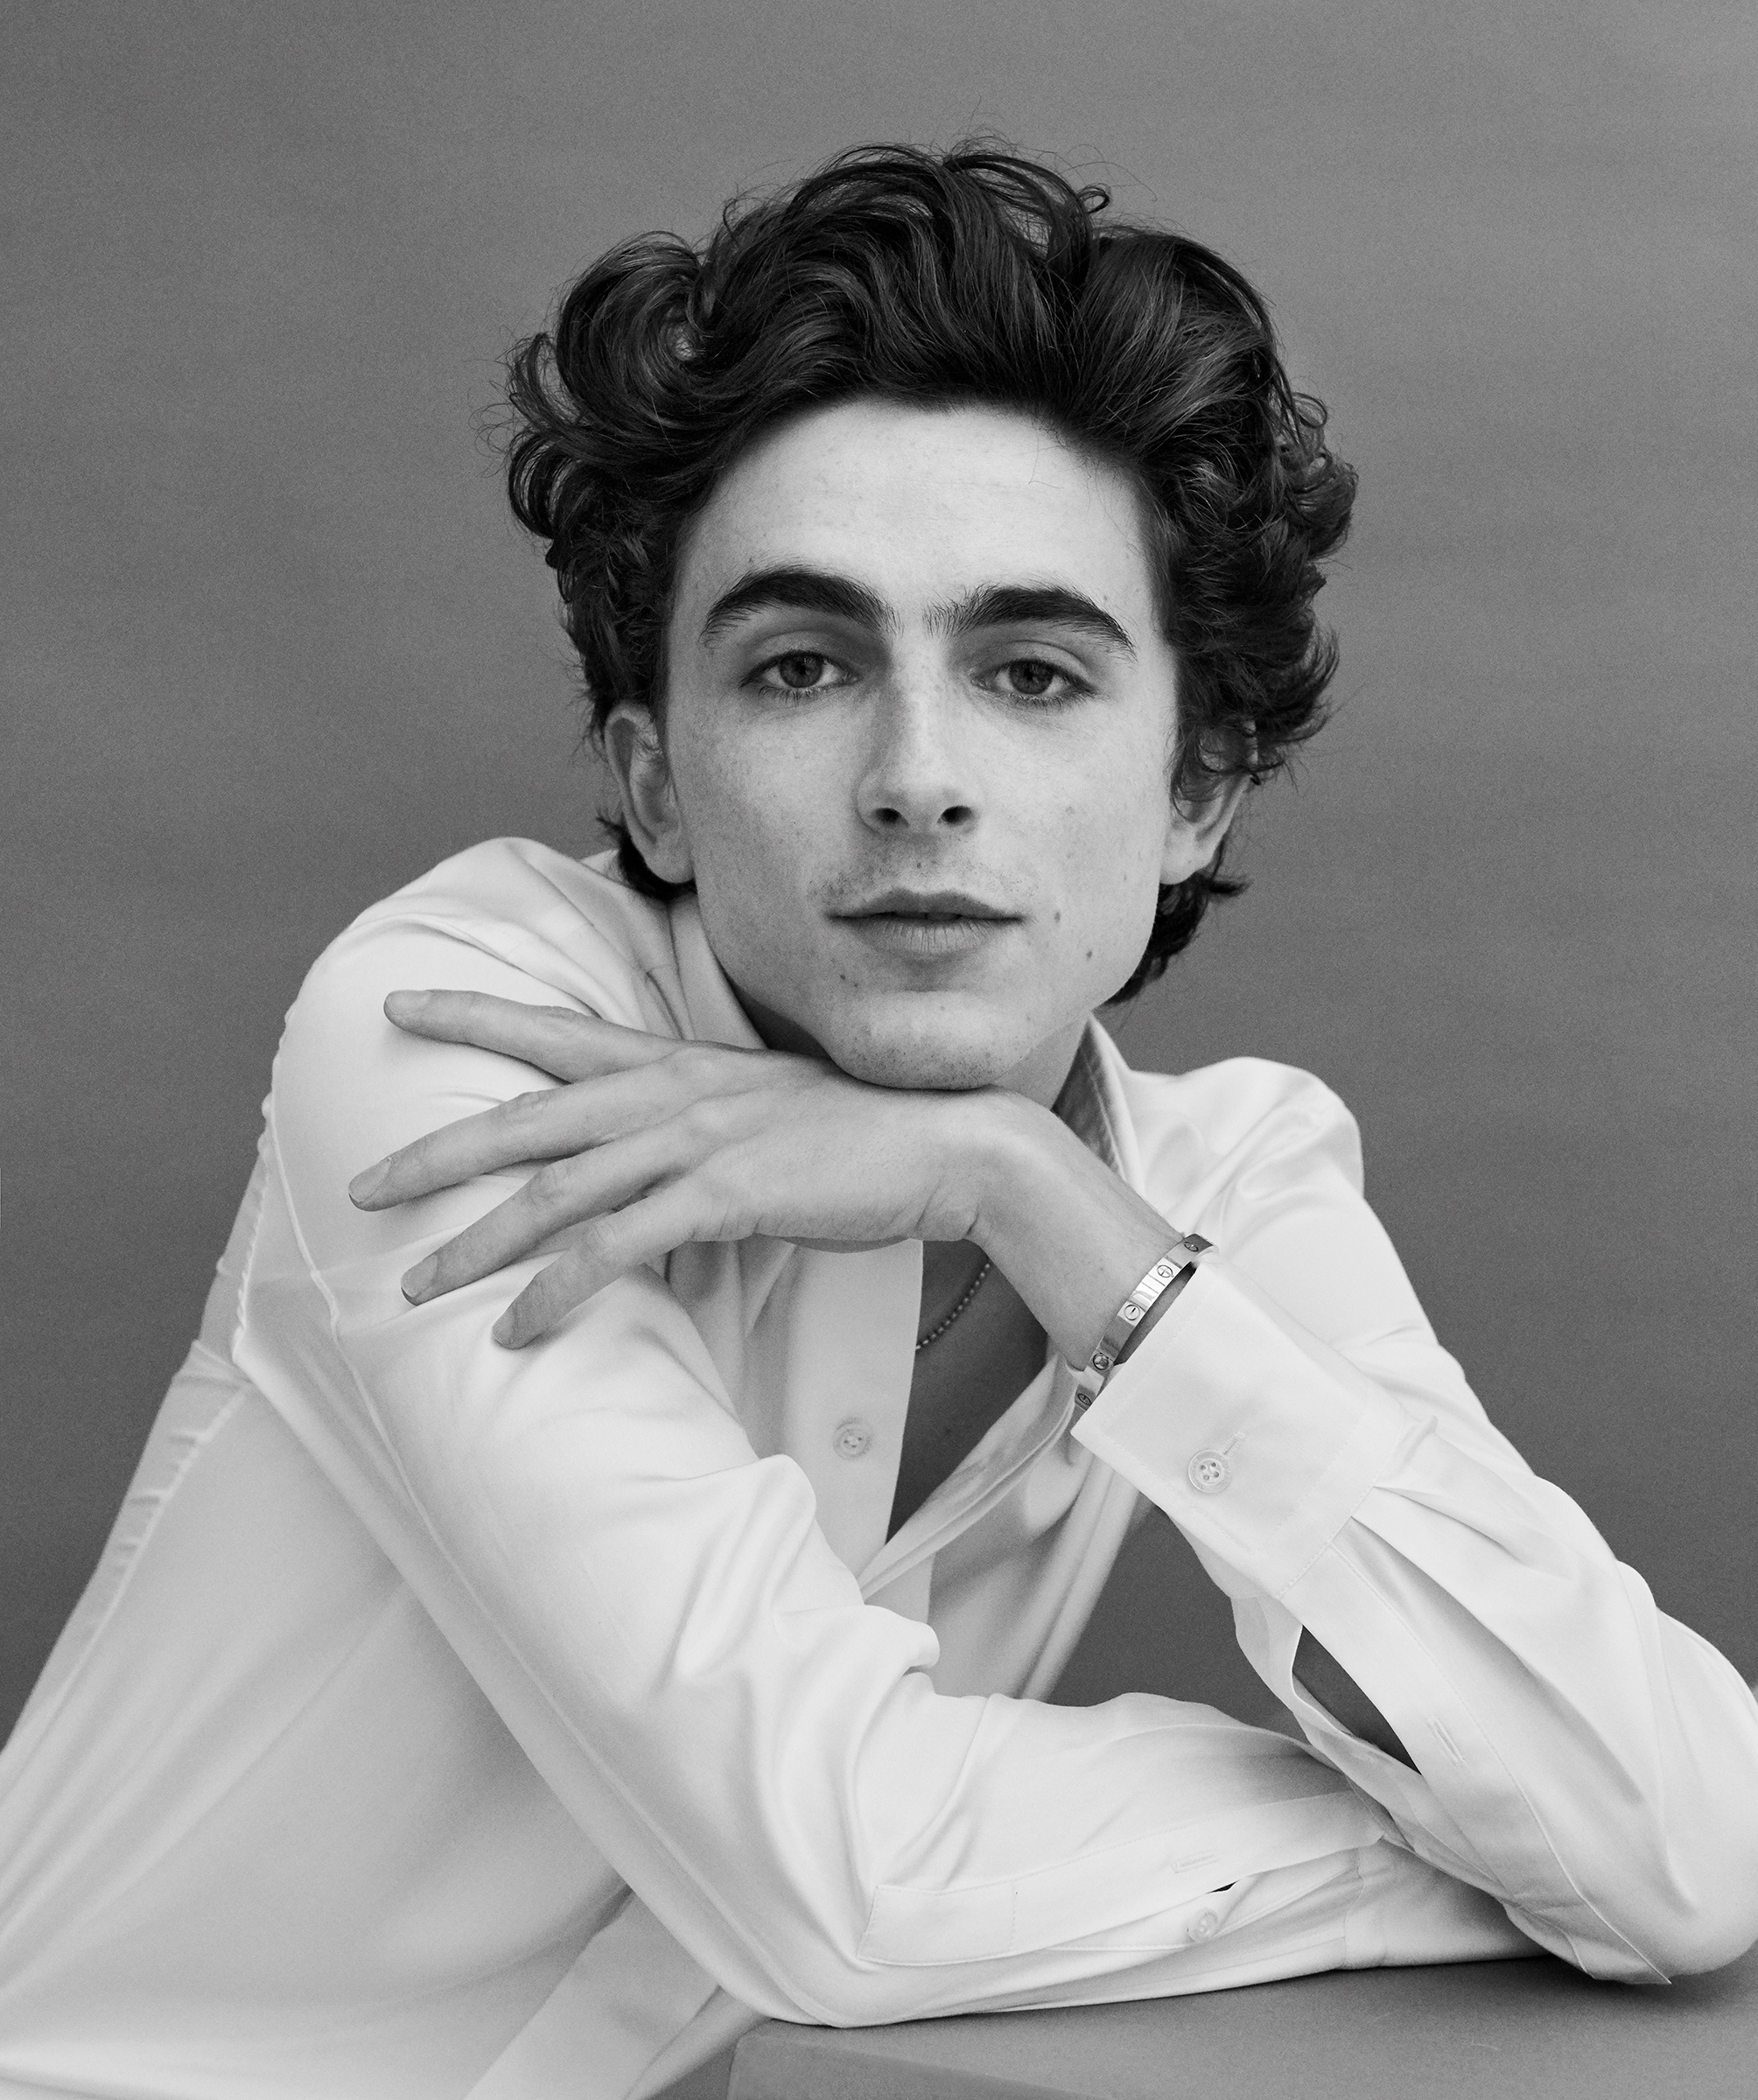 Timothée Chalamet has been named 2019's most influential man in fashion